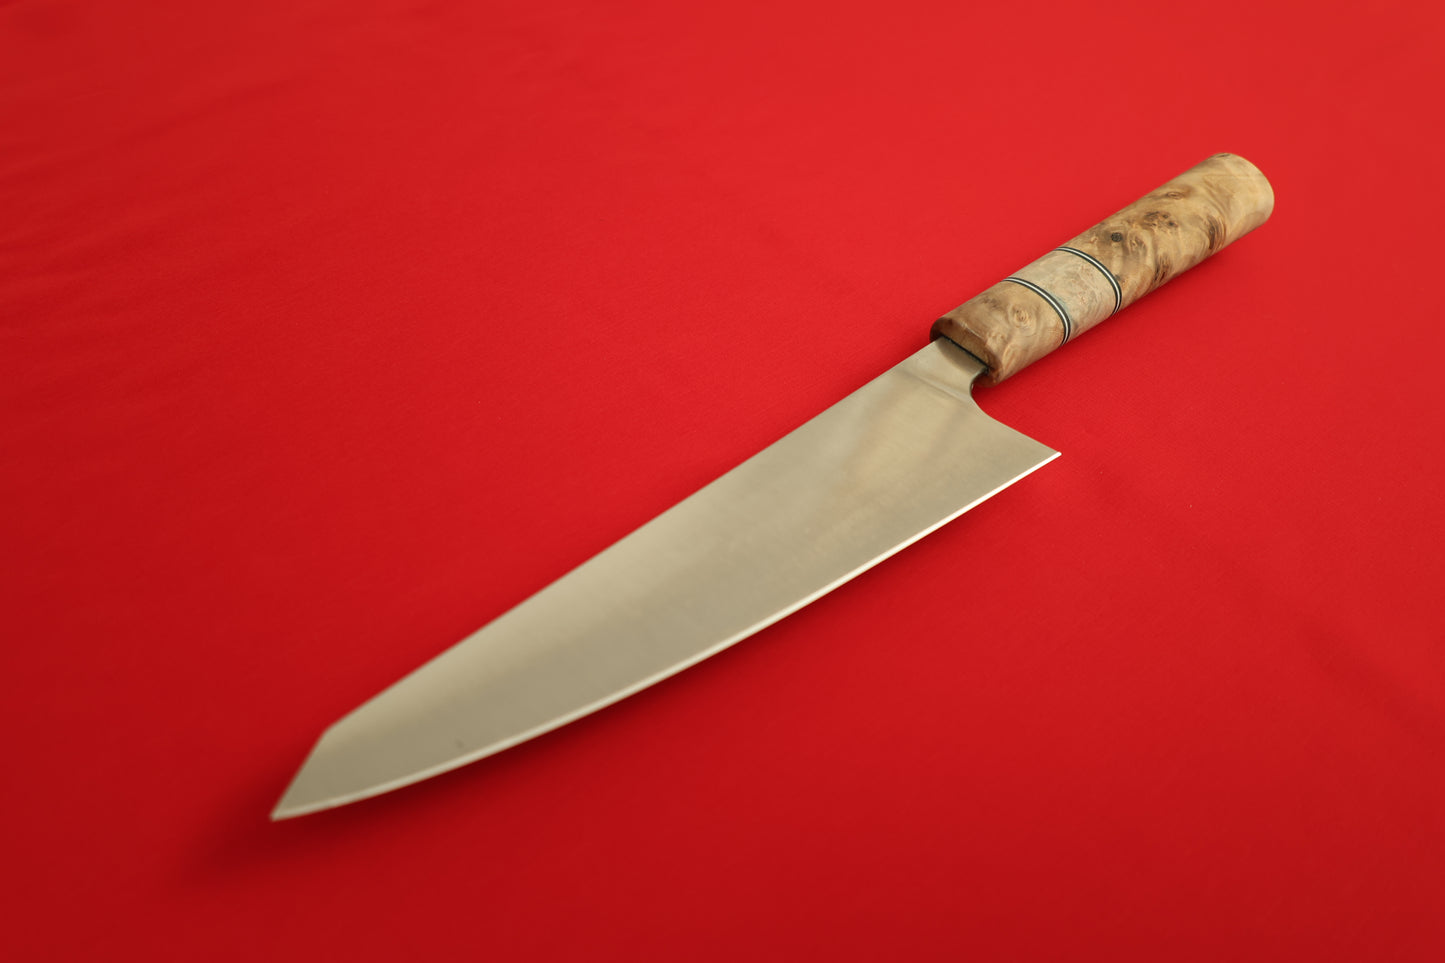 Kiritsuke with wooden handle on red background.